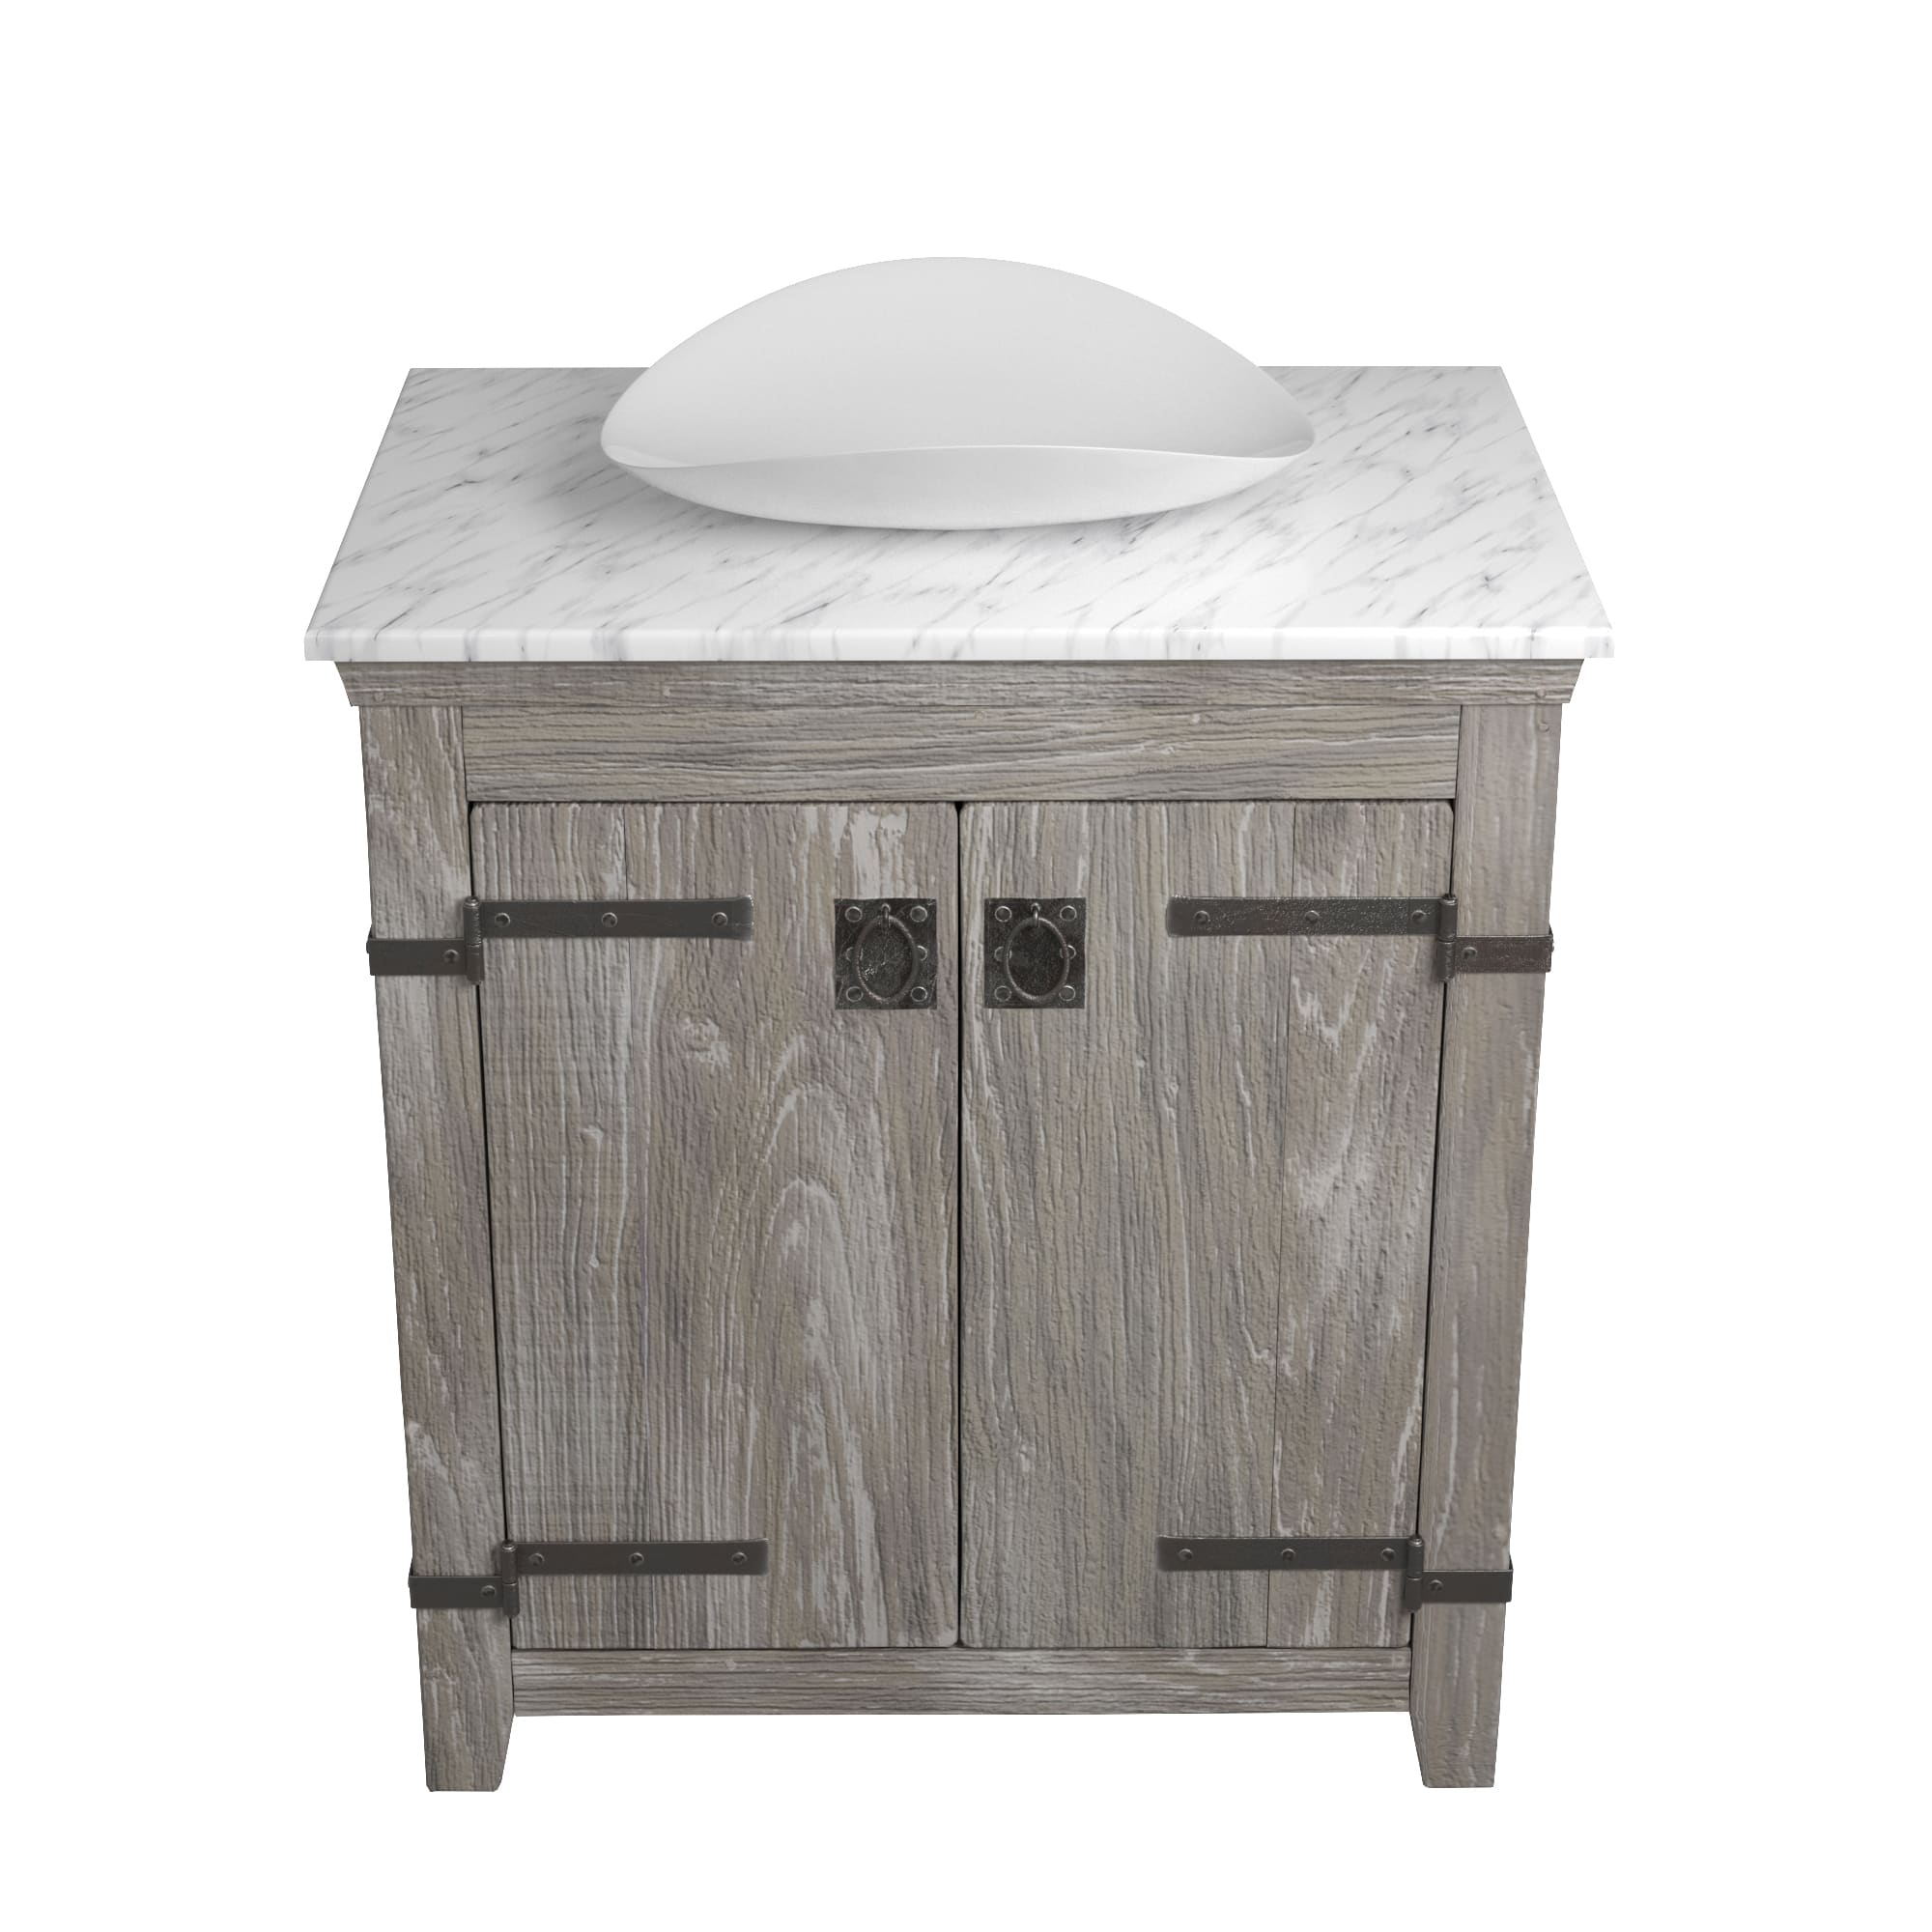 Native Trails 30" Americana Vanity in Driftwood with Carrara Marble Top and Sorrento in Bianco, Single Faucet Hole, BND30-VB-CT-MG-103